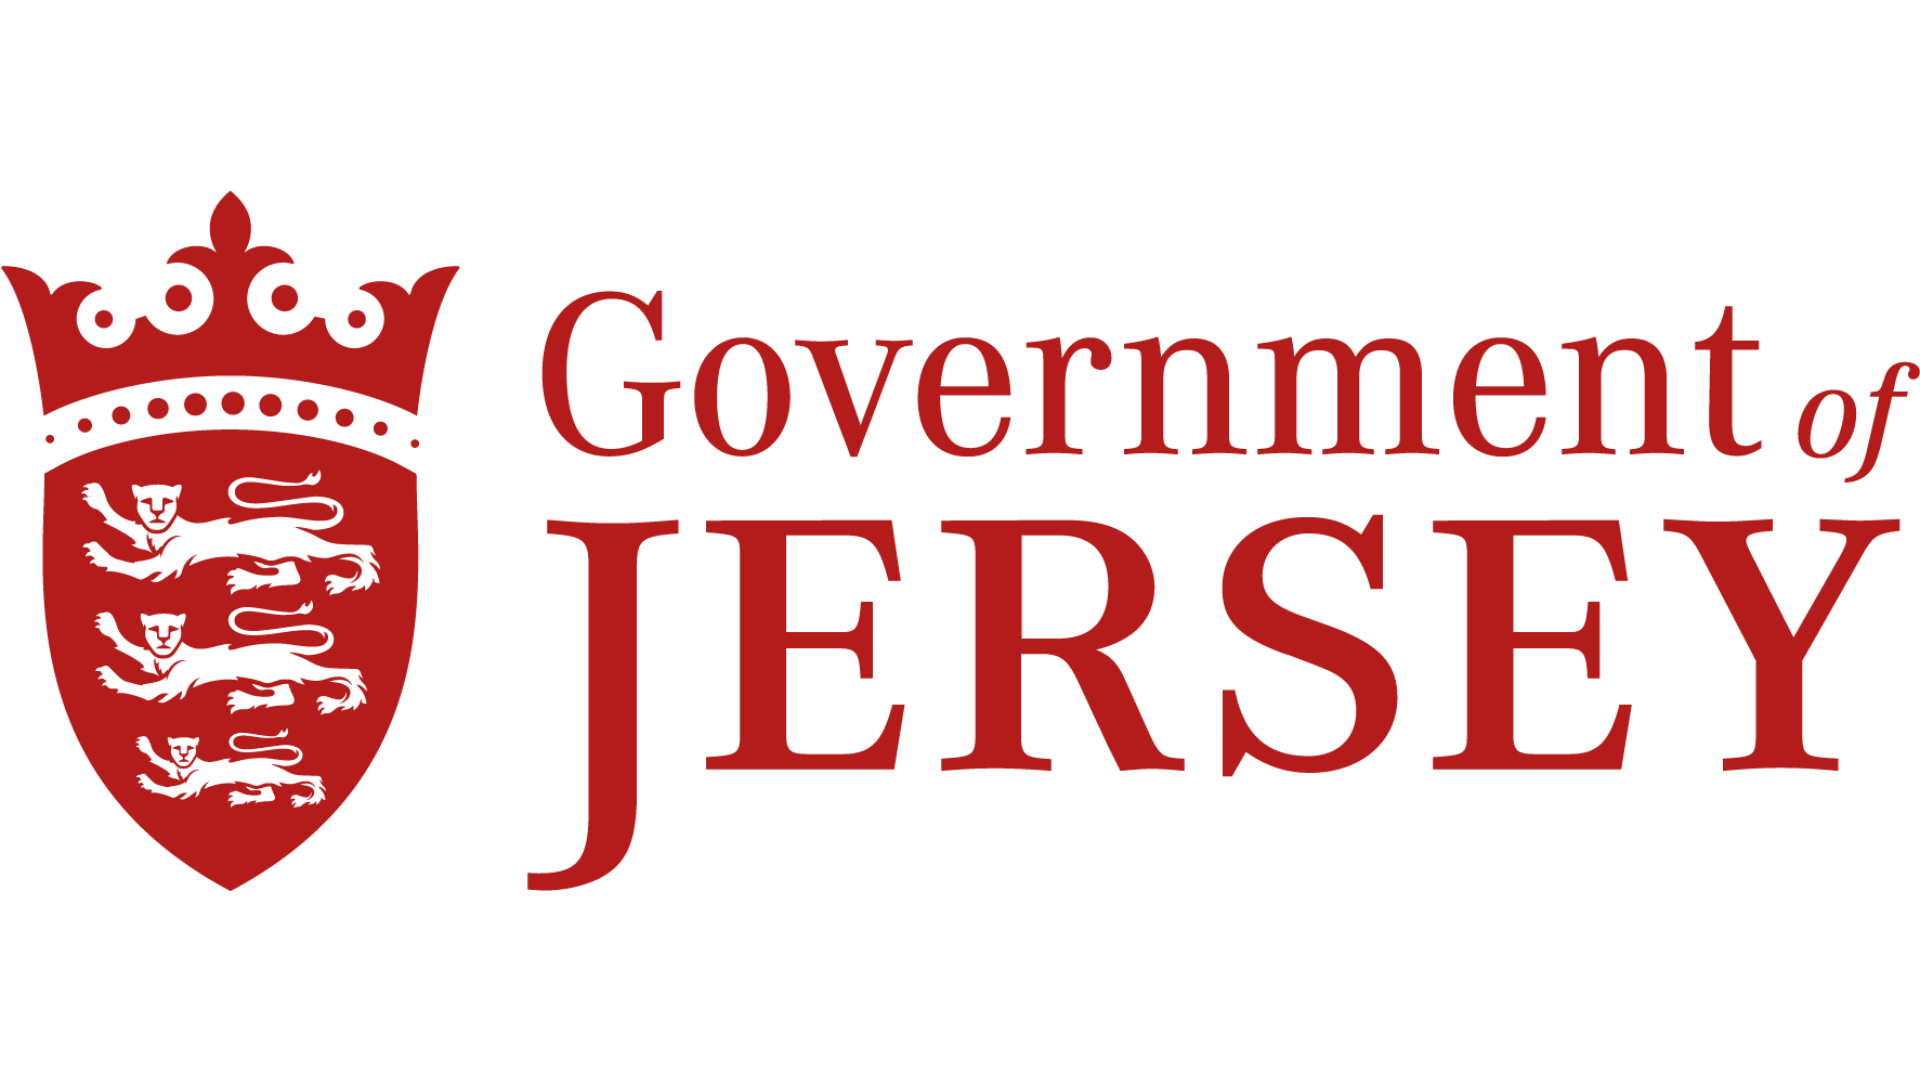 whats on in jersey august 2019